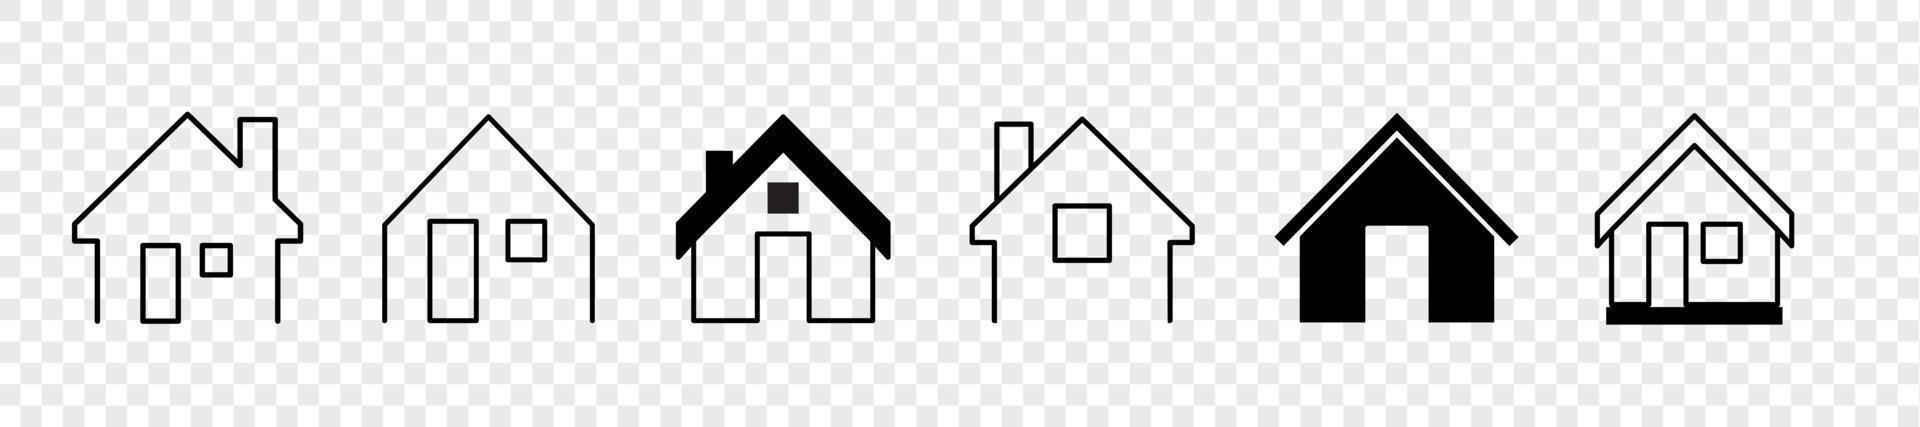 House icons set. Home icon collection. Real estate. Flat style houses symbols for apps and websites on background vector